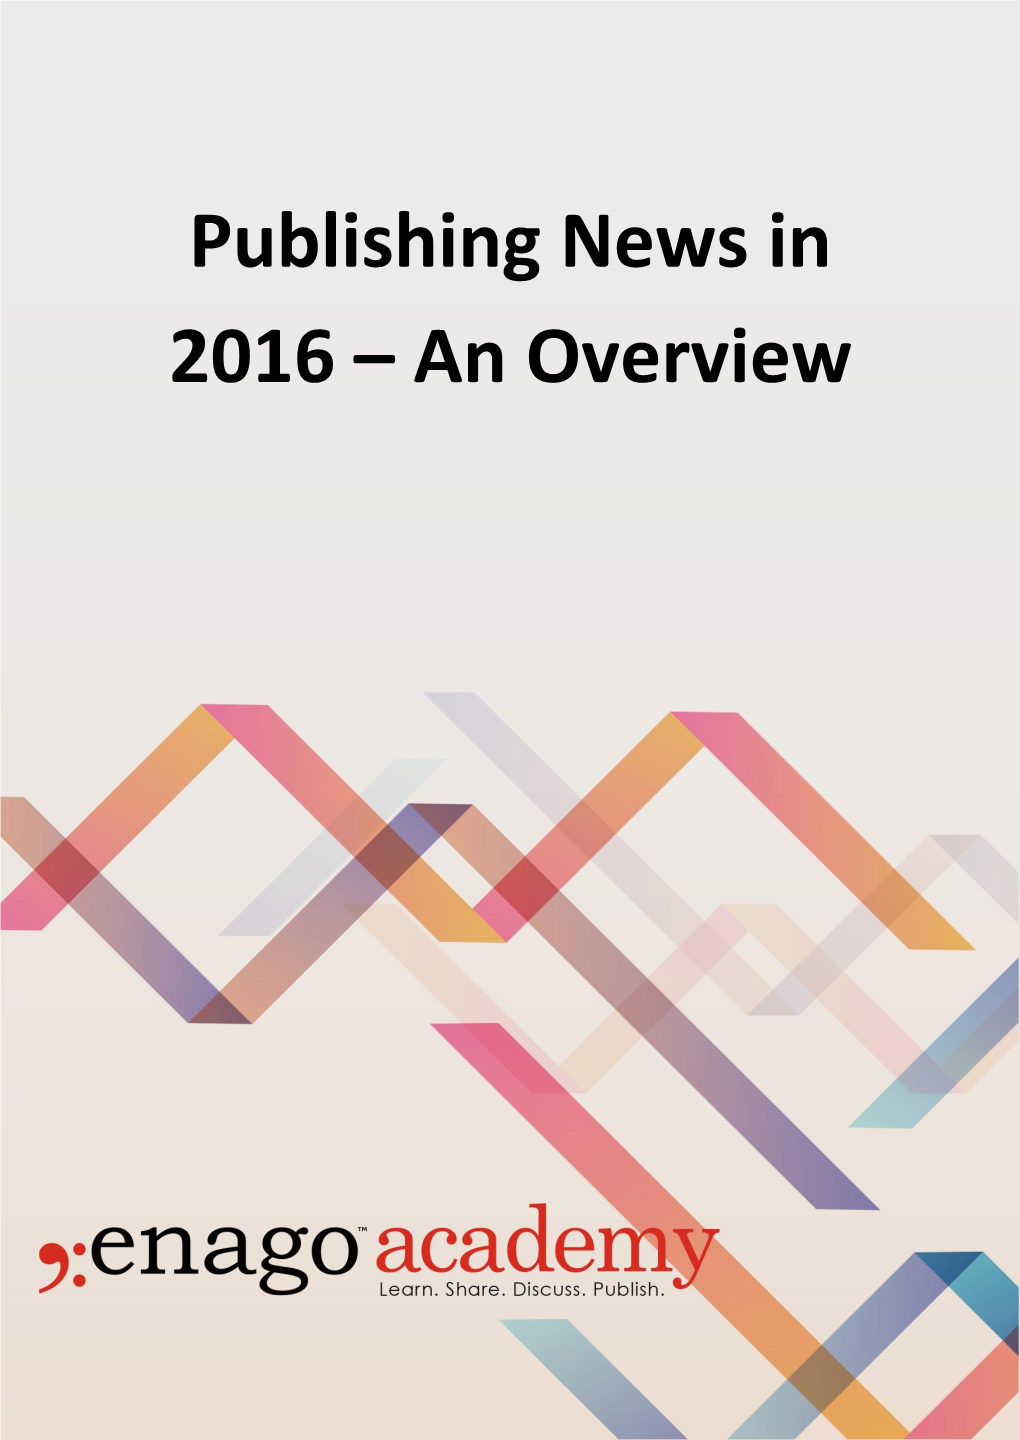 Publishing News in 2016 – an Overview